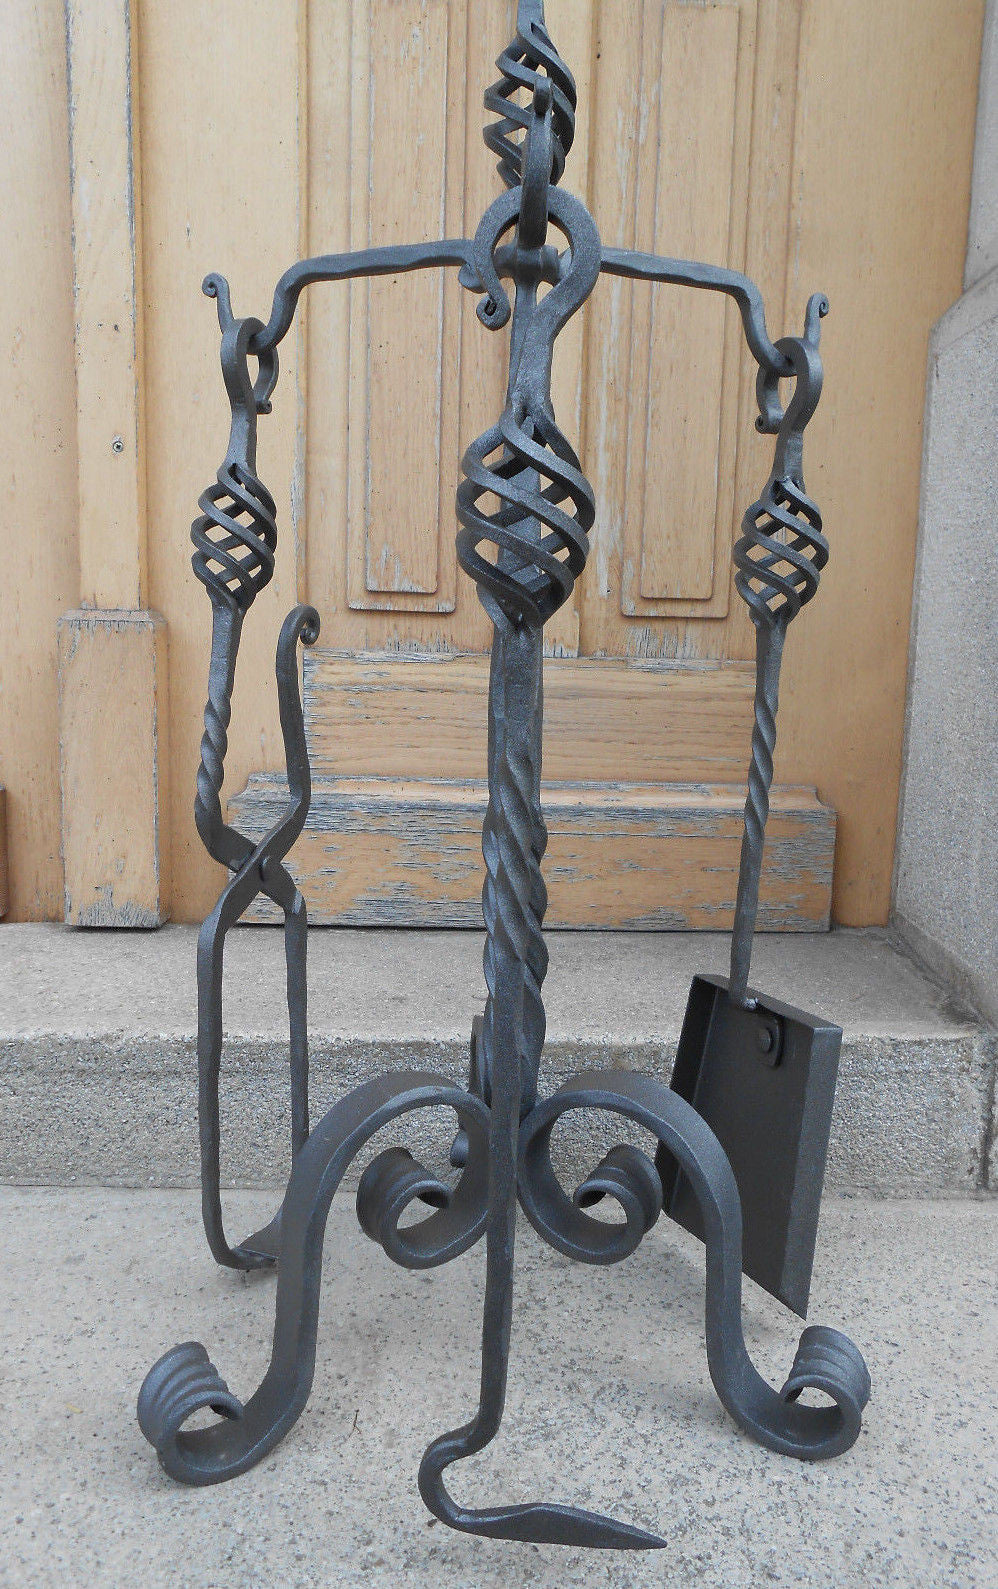 Luxury Hand Forged Fireplace Tools Set Handmade 4 Pieces Set 68cm - Handcrafted Wood, Iron & Copper